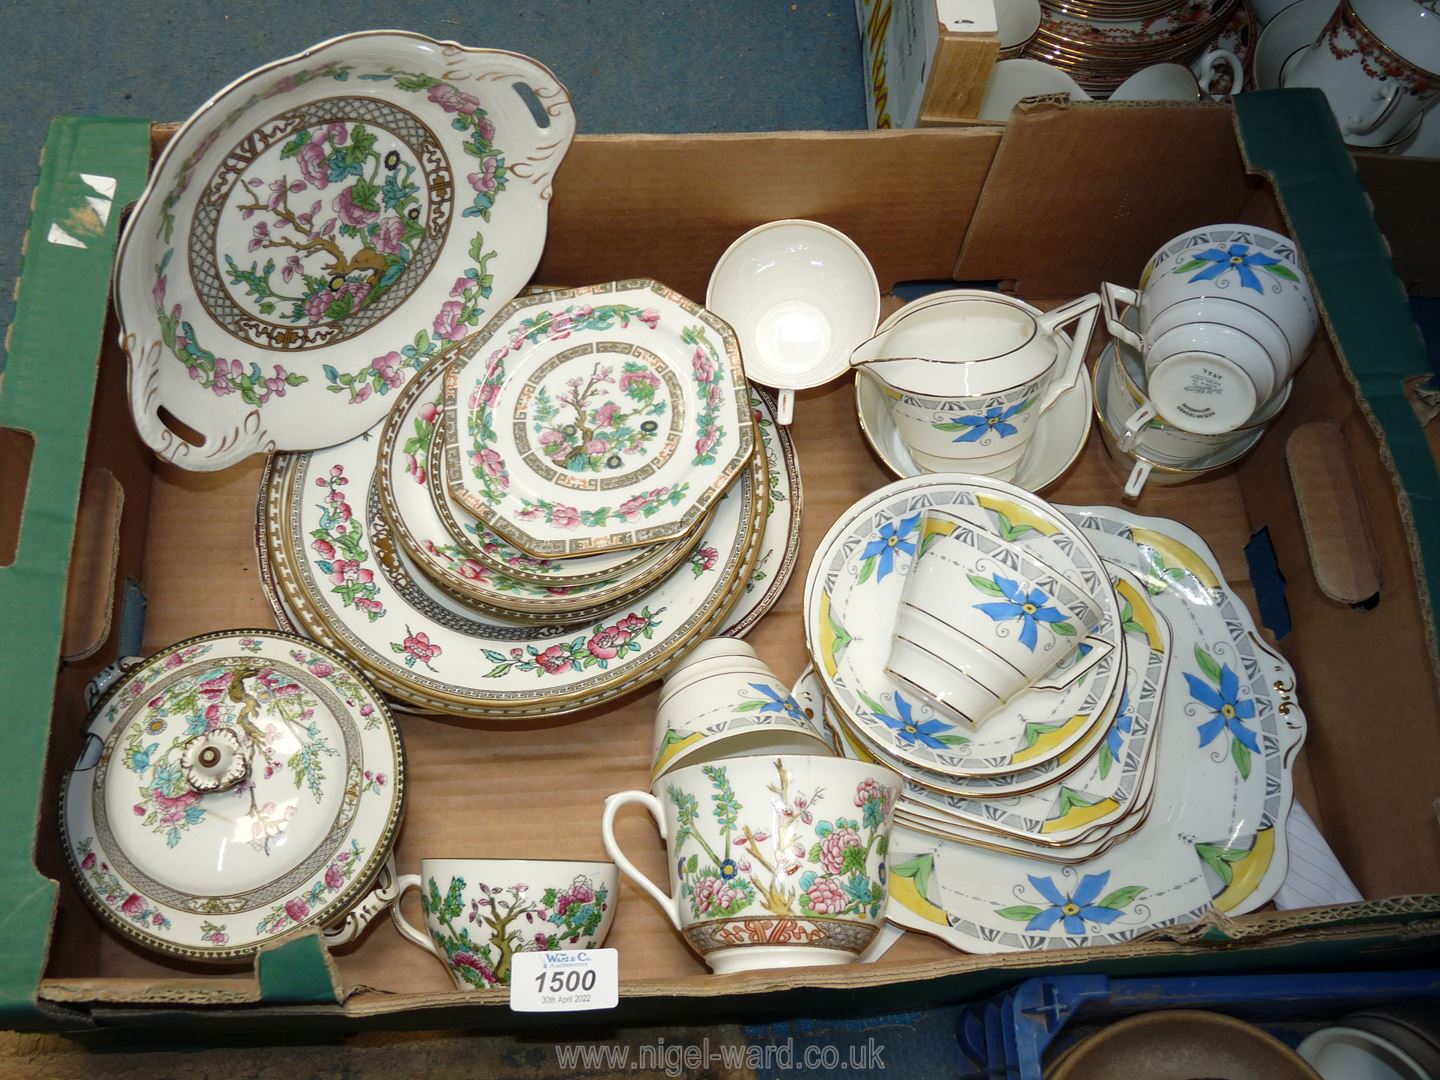 A quantity of china including Indian Tree by Coalport, Minton's, etc. and Bells china part Teaset.